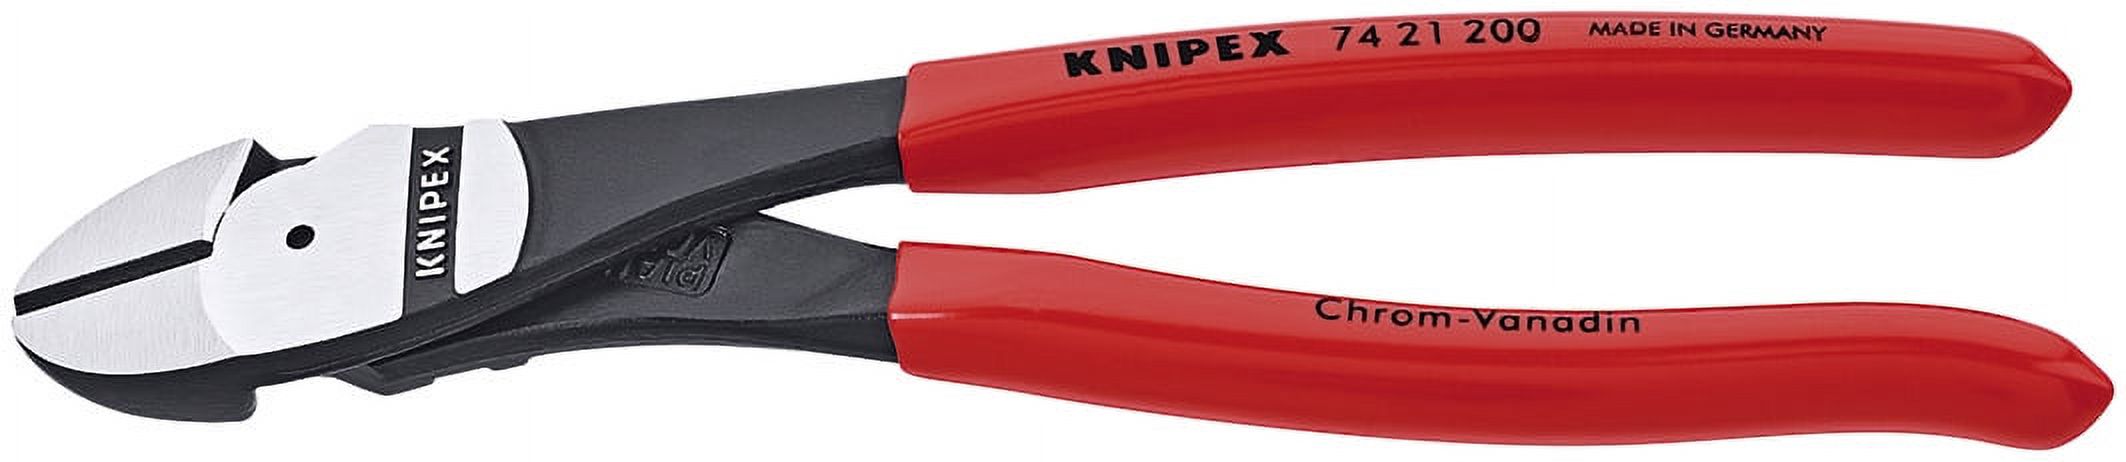 KNIPEX Tools 00 20 08 US1, Long Nose, Diagonal Cutter, and Alligator Pliers Tool Set, 3-Piece - image 4 of 5